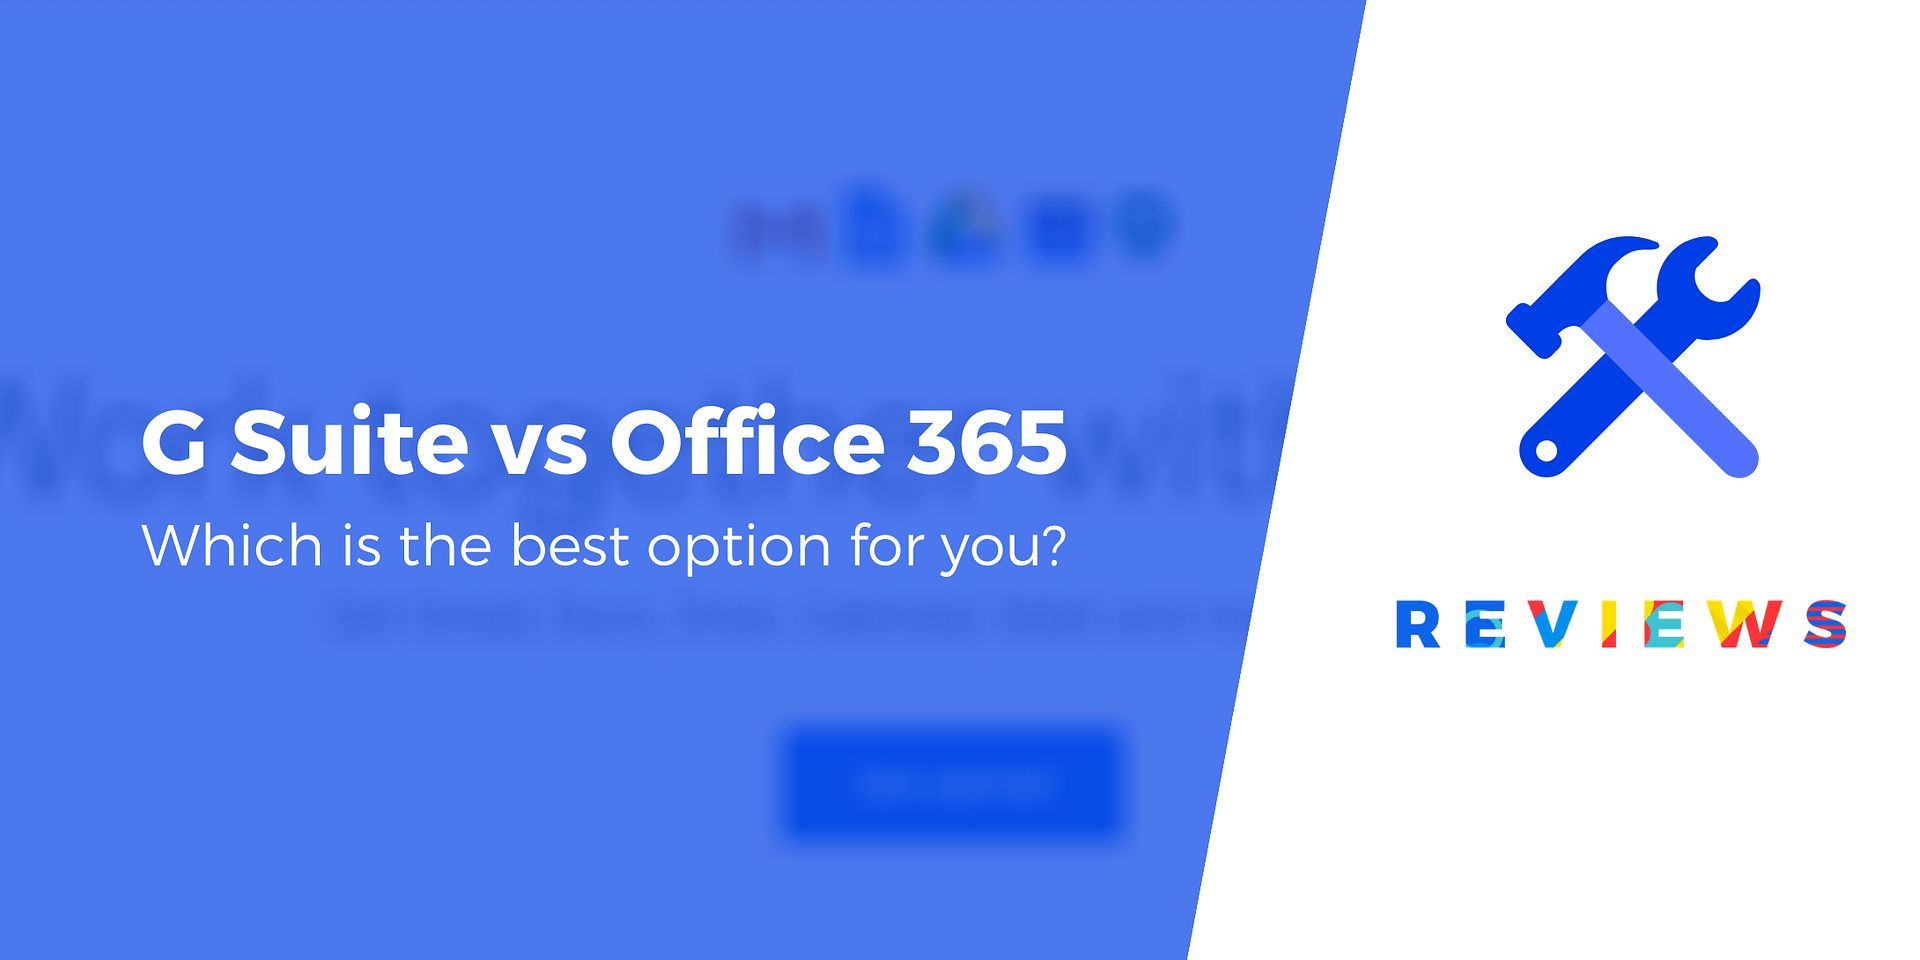 Google Workspace (G Suite) vs Office 365: Which One Is Better?